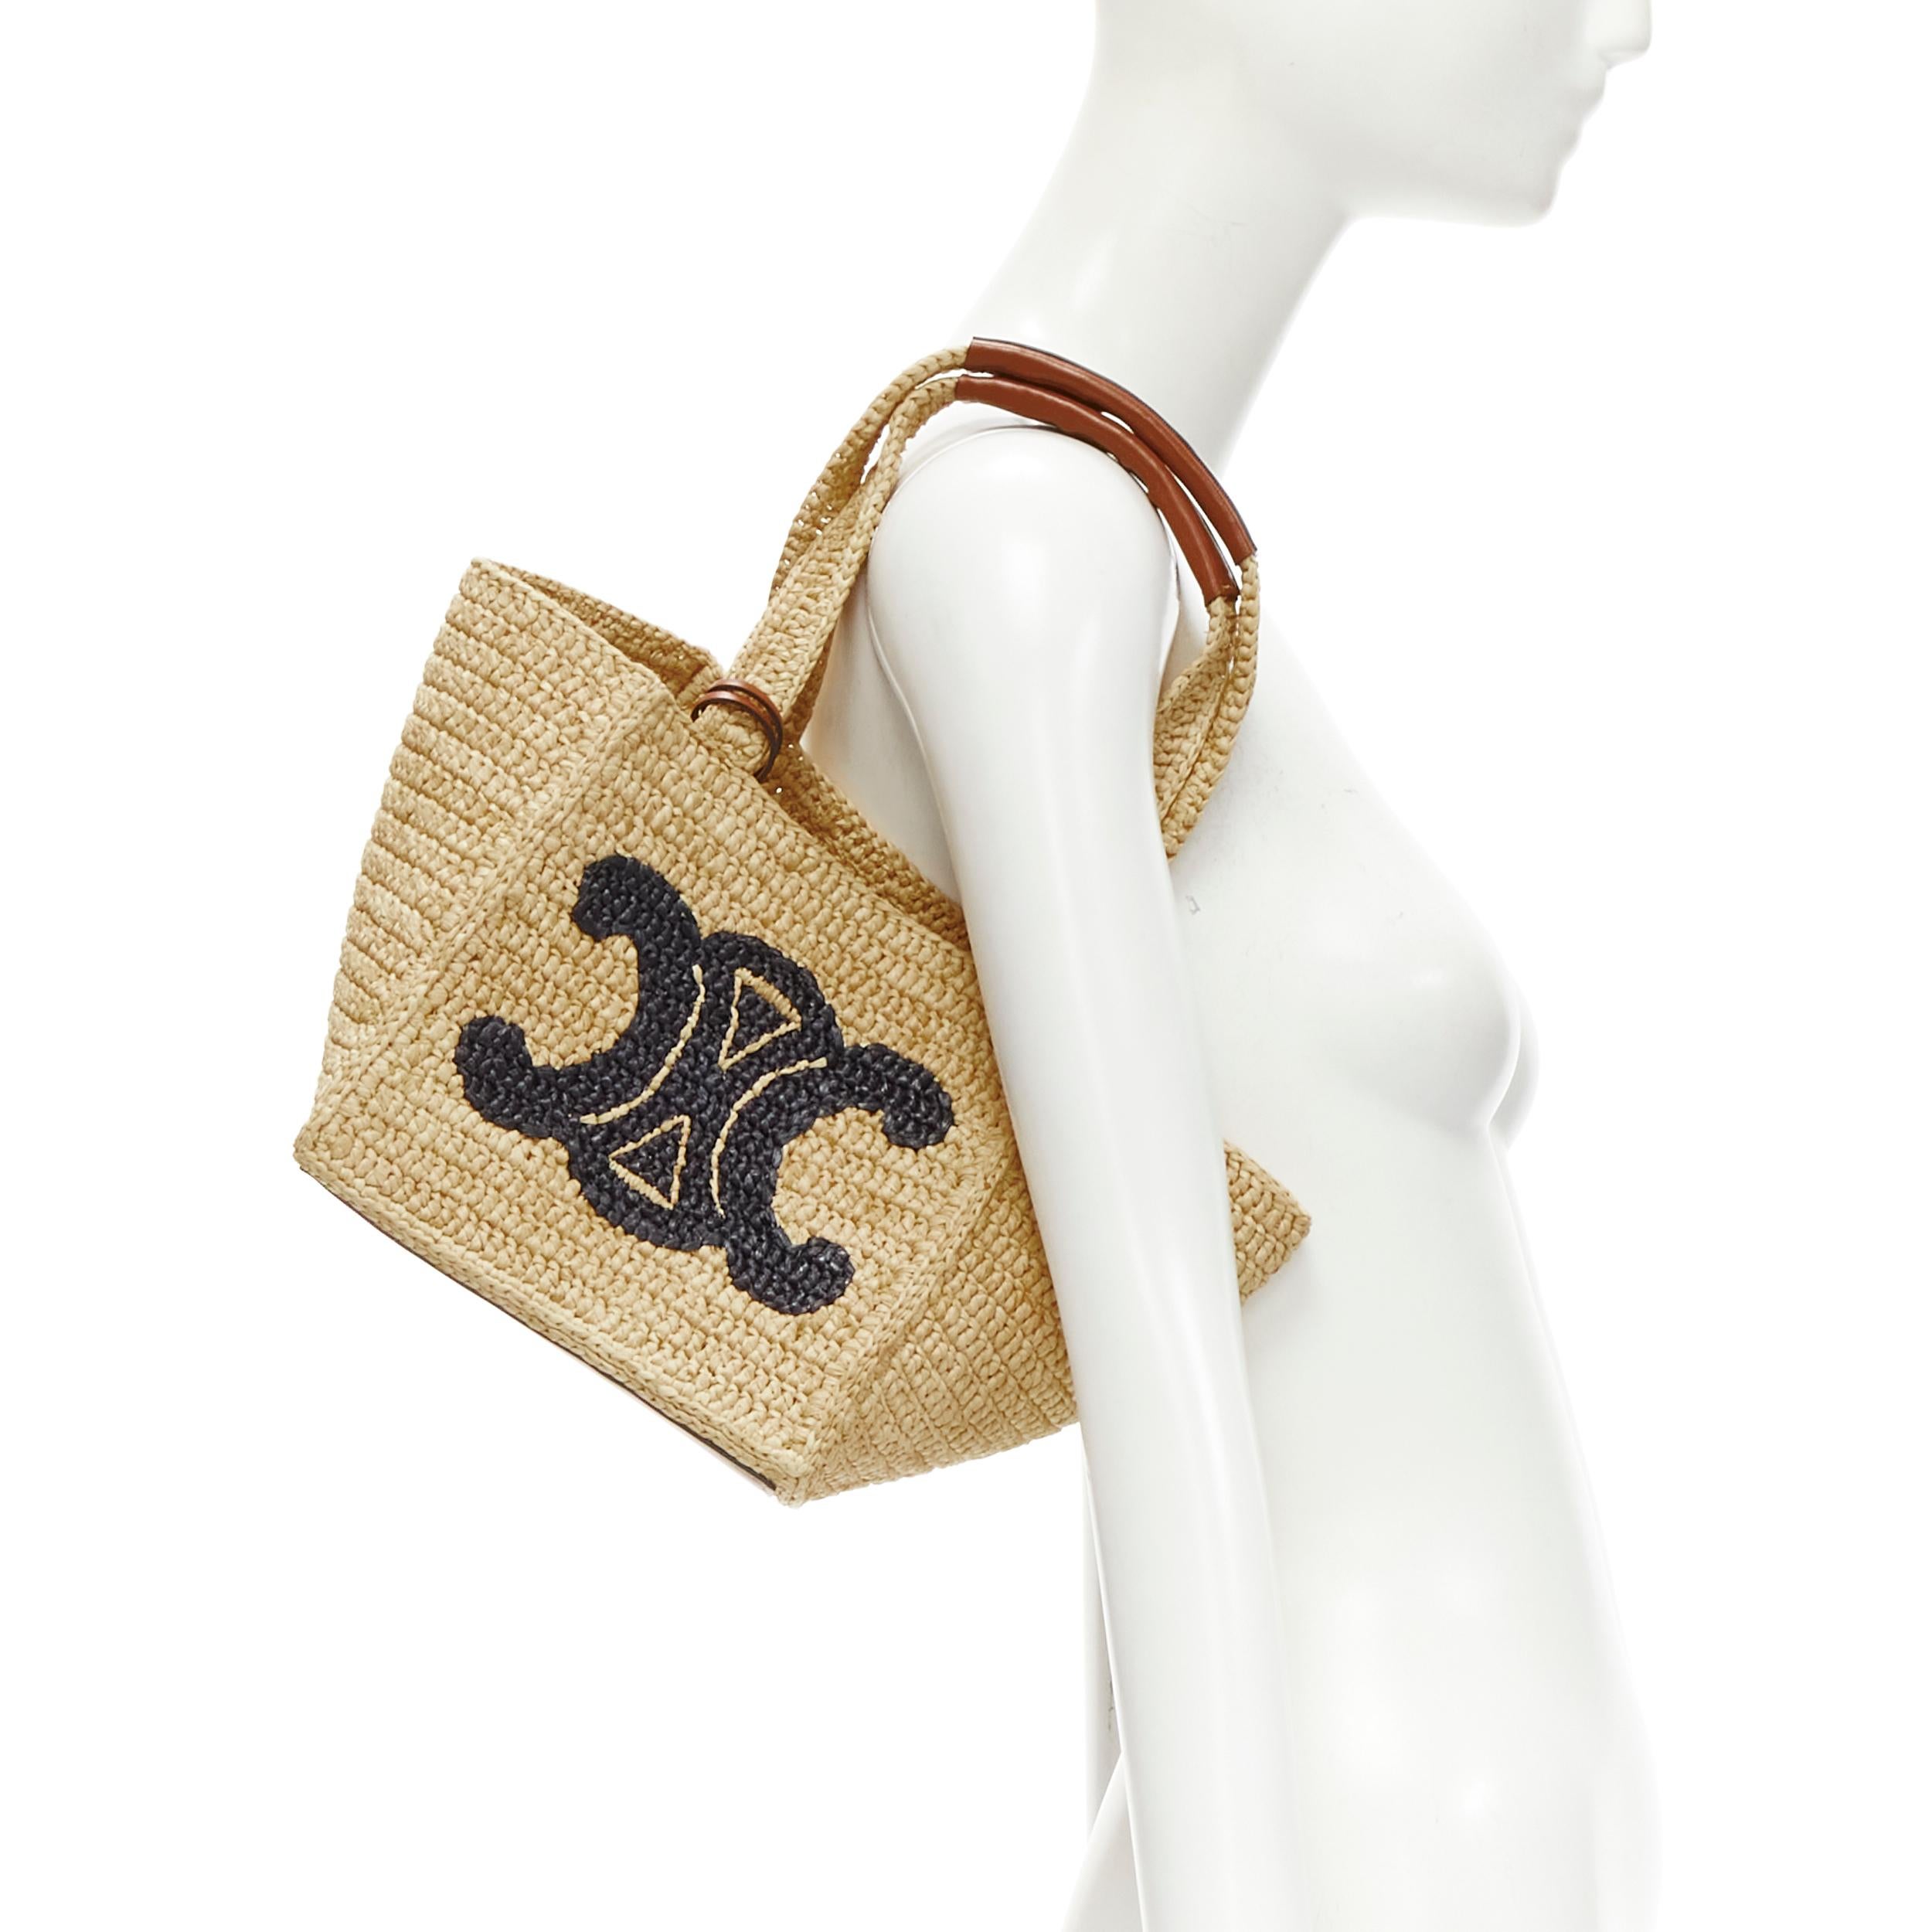 new CELINE 2022 Cube Triomphe logo beige raffia leather top handle tote
Reference: JYLM/A00032
Brand: Celine
Designer: Hedi Slimane
Model: Cube
Collection: 2022
Material: Raffia, Leather
Color: Beige, Brown
Pattern: Solid
Extra Details: Attached